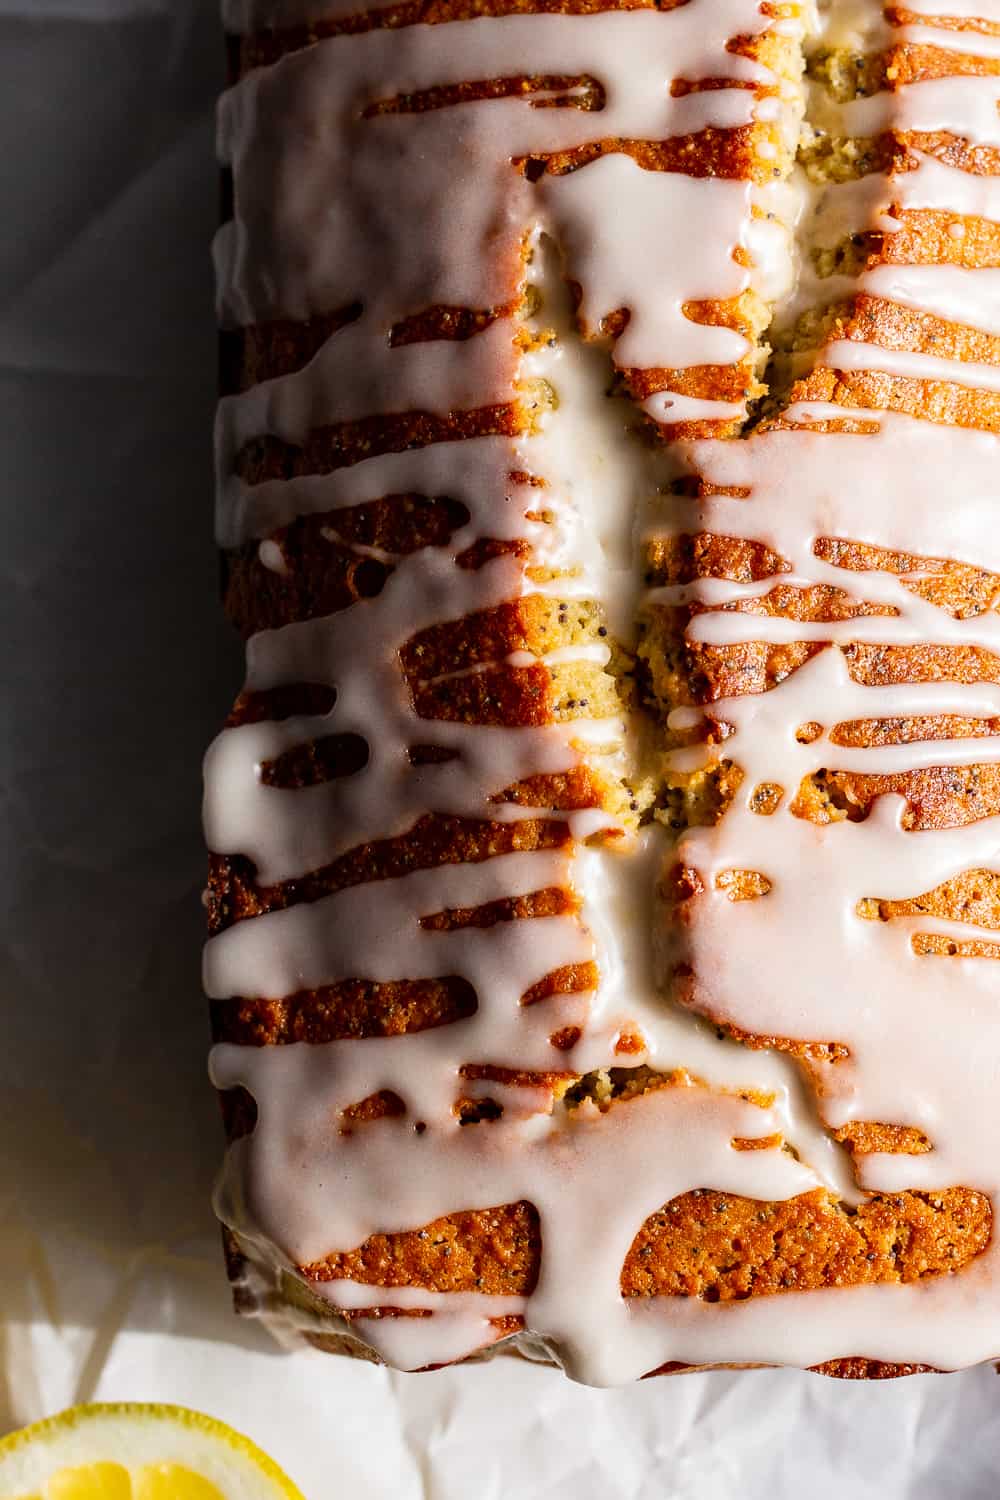 This Paleo Lemon Poppy Seed Bread is tender, moist and loaded with lemon flavor with just the right amount of sweetness.  It's drizzled with a sweet glaze for the perfect touch.  Great for brunches, dessert and snacks, this quick bread is gluten free, grain free, dairy free and refined sugar free. #paleo #glutenfree #grainfree 